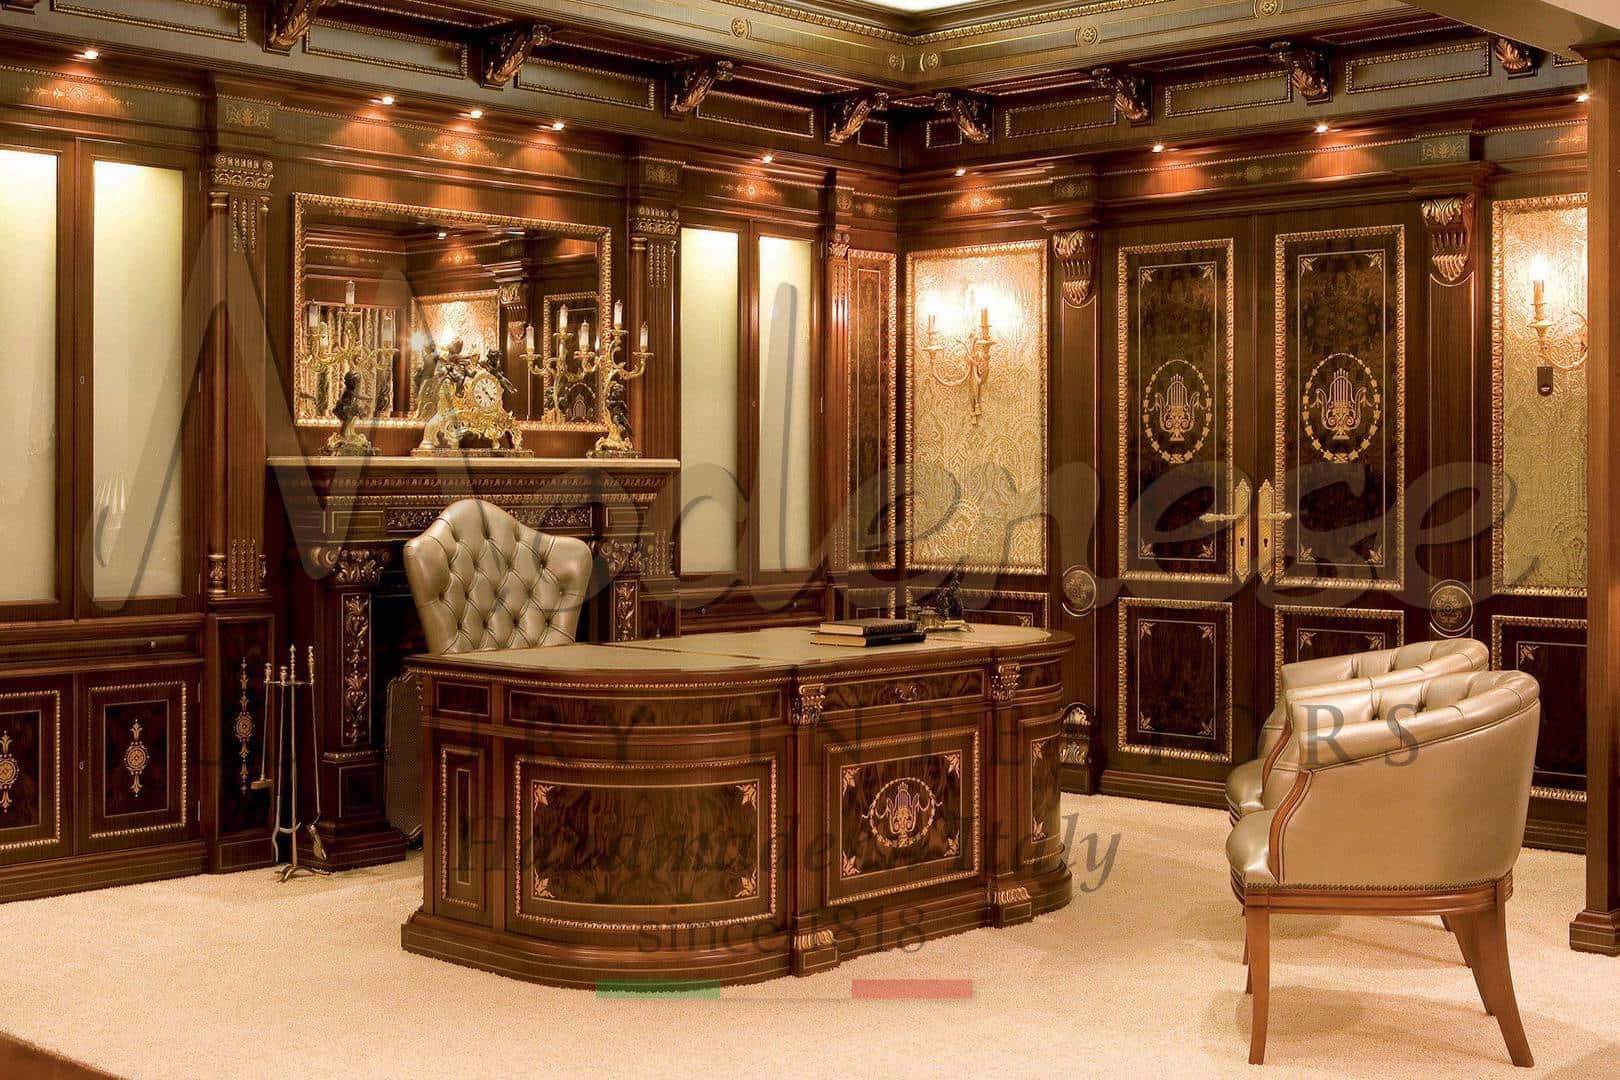 executive office project selection handmade artisans layout ideas interior design service consult ideas french style classic luxury royal majestic elegant space refined baroque opulent custom fit out furniture production handcrafted italian quality high selection best classic classy baroque victorian louis xv xvi exclusive interior design